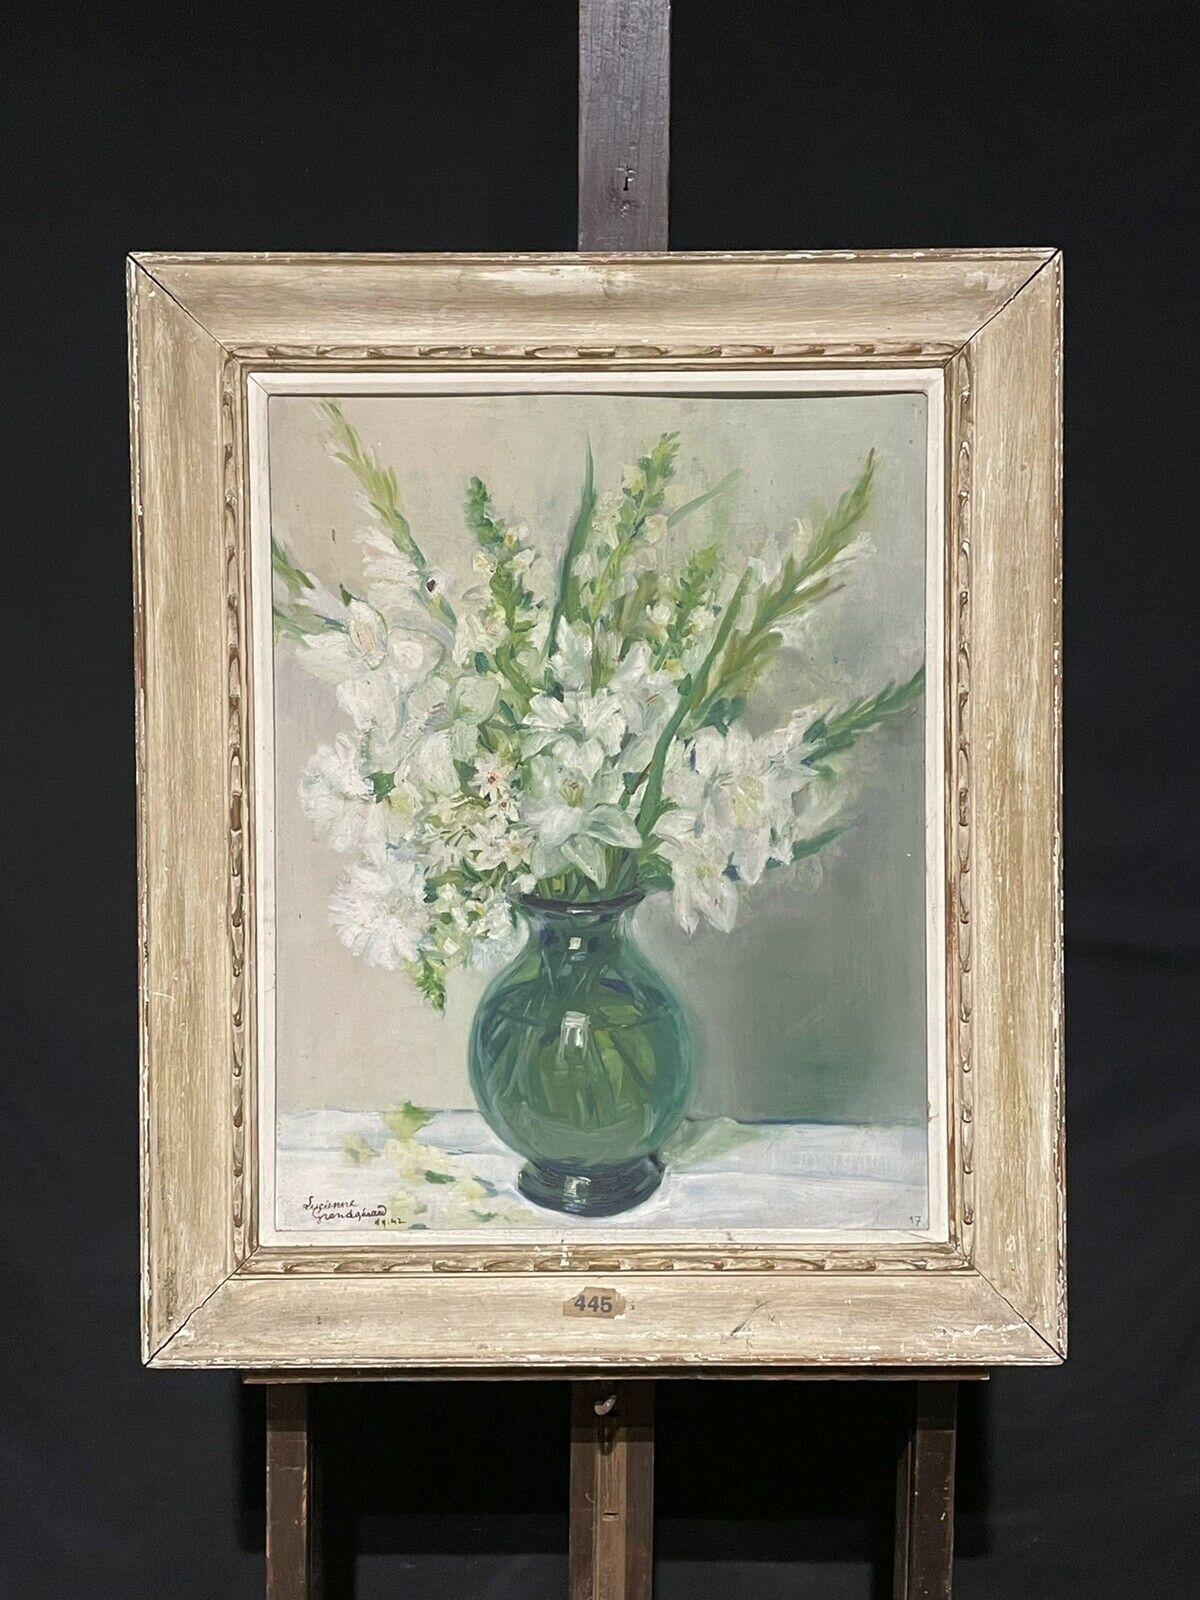 1940's FRENCH SIGNED OIL PAINTING - WHITE FLOWERS IN GREEN GLASS VASE - LARGE - Painting by Lucienne Estival - Grandgerard